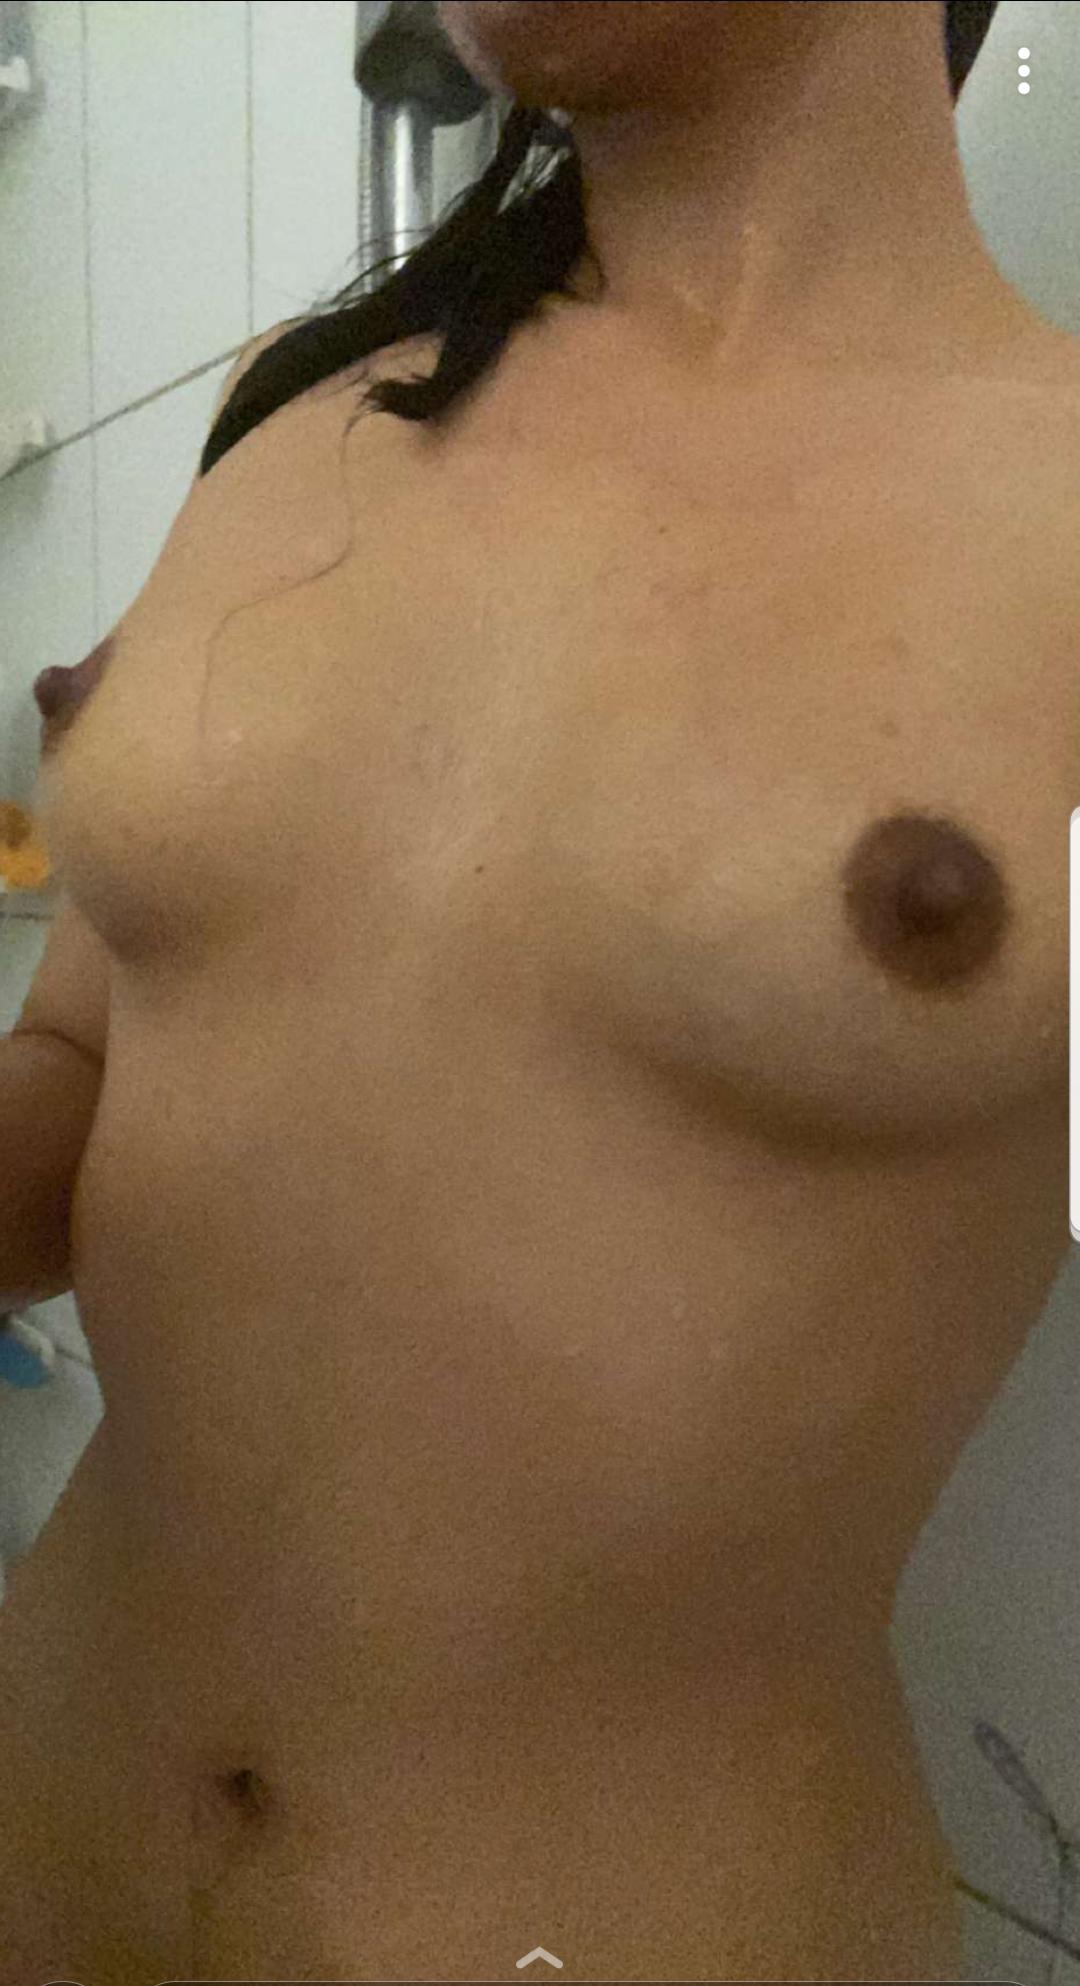 Finally convinced my shy gf to let me show her tits. The first step to making her a hotwife ;).